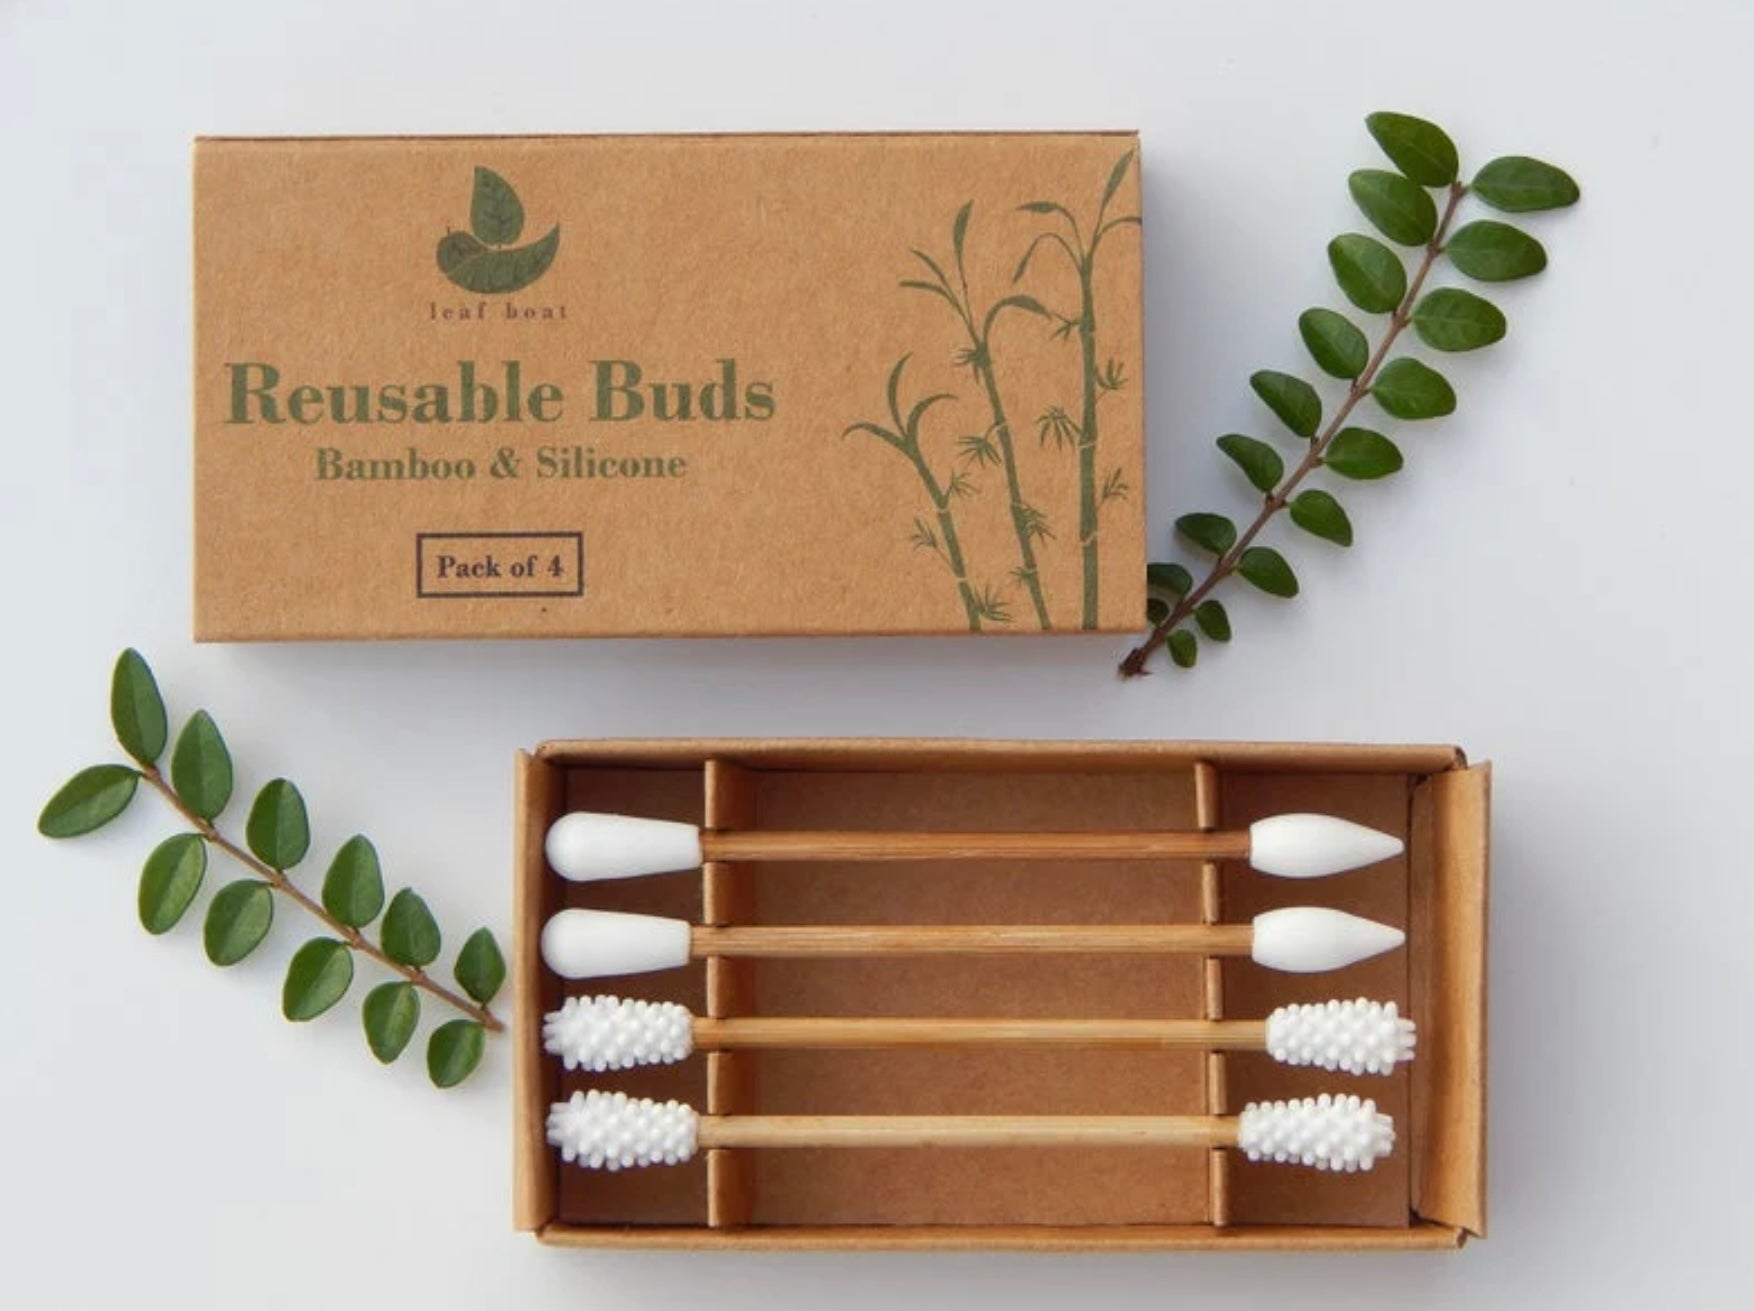 Leaf Boat Bamboo & Silicone Reusable Buds